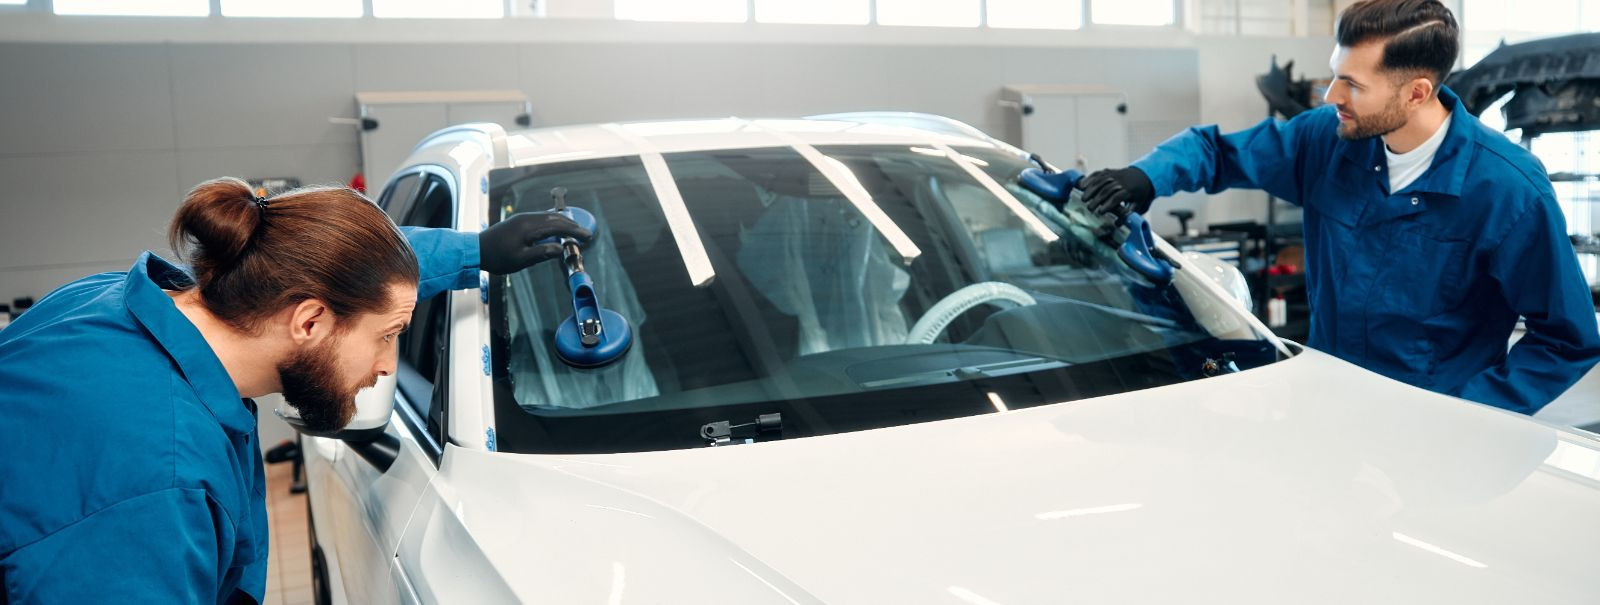 Mobile glass repair services have revolutionized the way vehicle owners and fleet operators manage glass damage. These services bring the repair shop to you, of